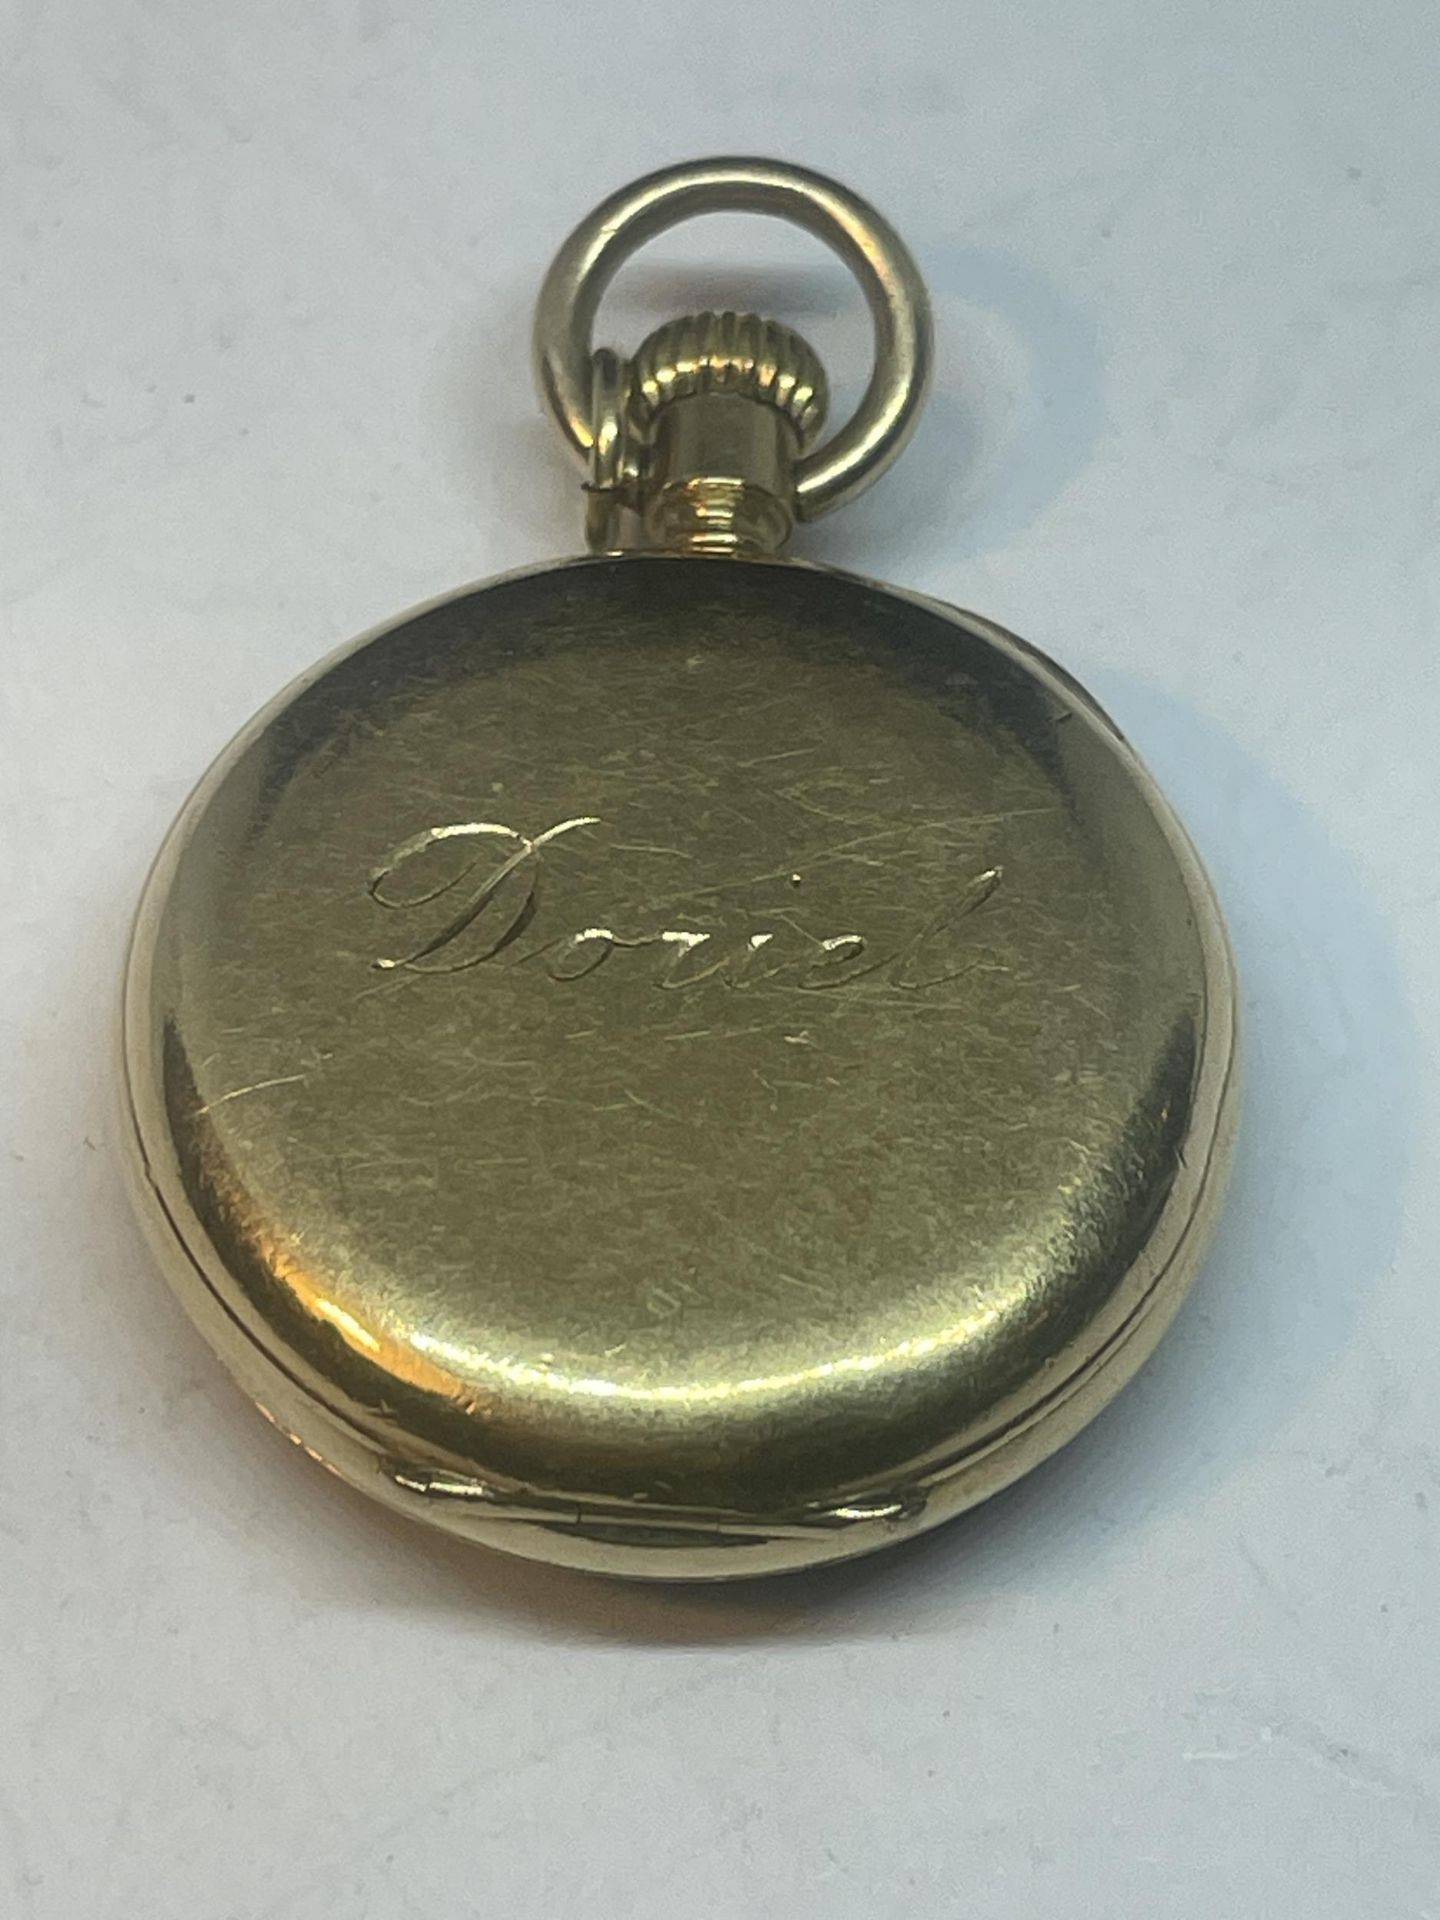 A 14CT GOLD LADIES OPEN FACED POCKET WATCH GROSS WEIGHT 40.20 GRAMS - Image 2 of 8